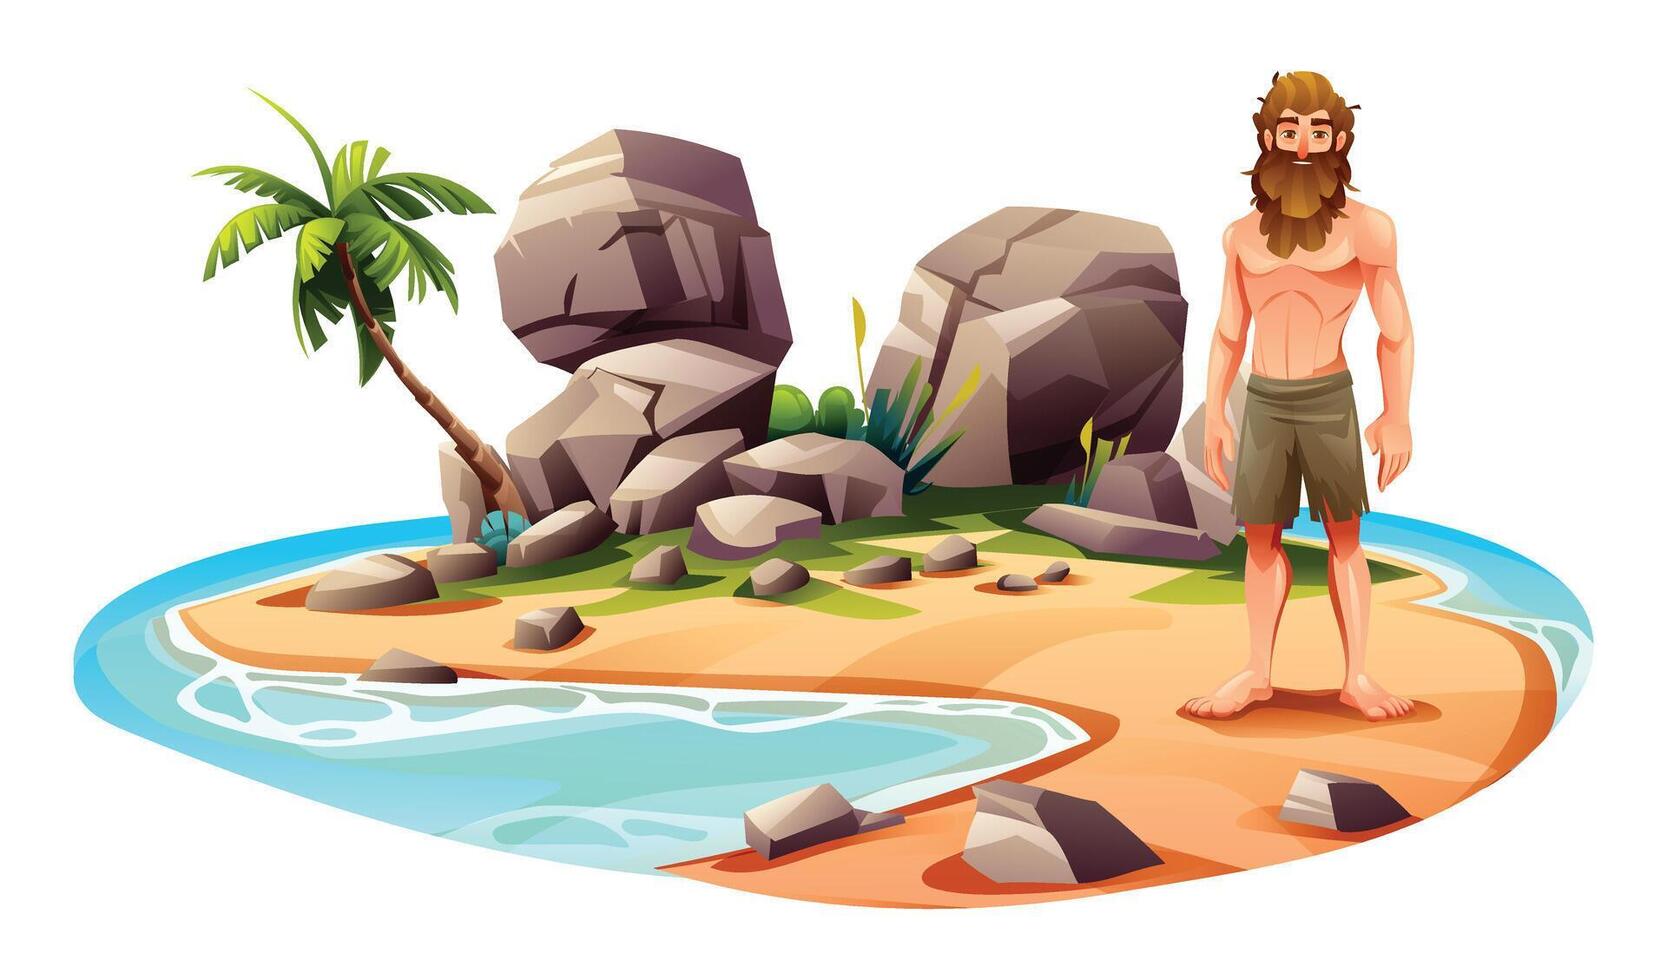 Shipwreck man on desert island with palm trees and rocks. Vector cartoon illustration isolated on white background